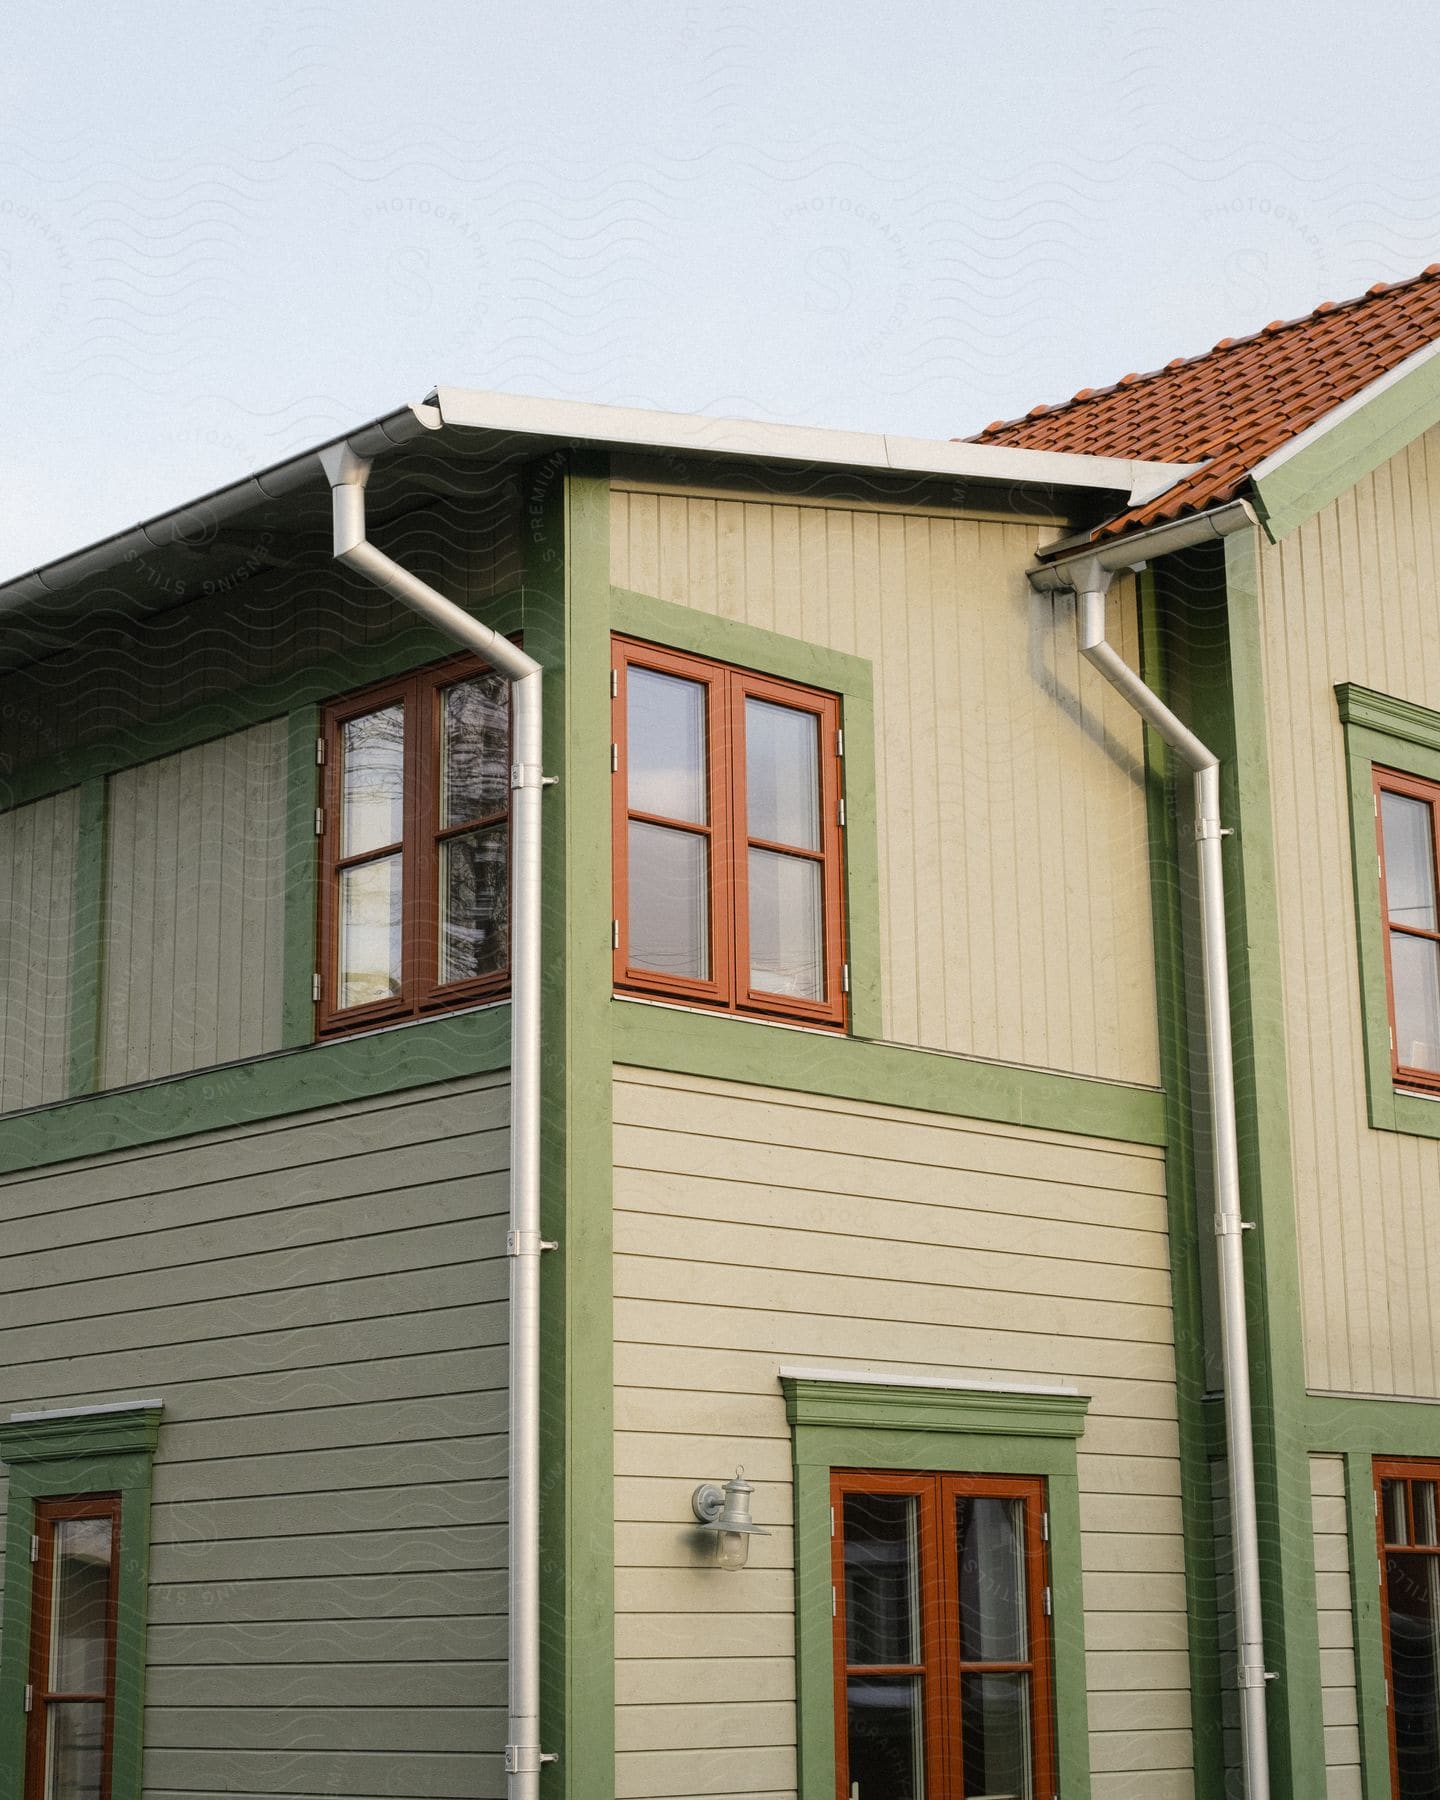 House with roof gutter drainage pipes near the windows